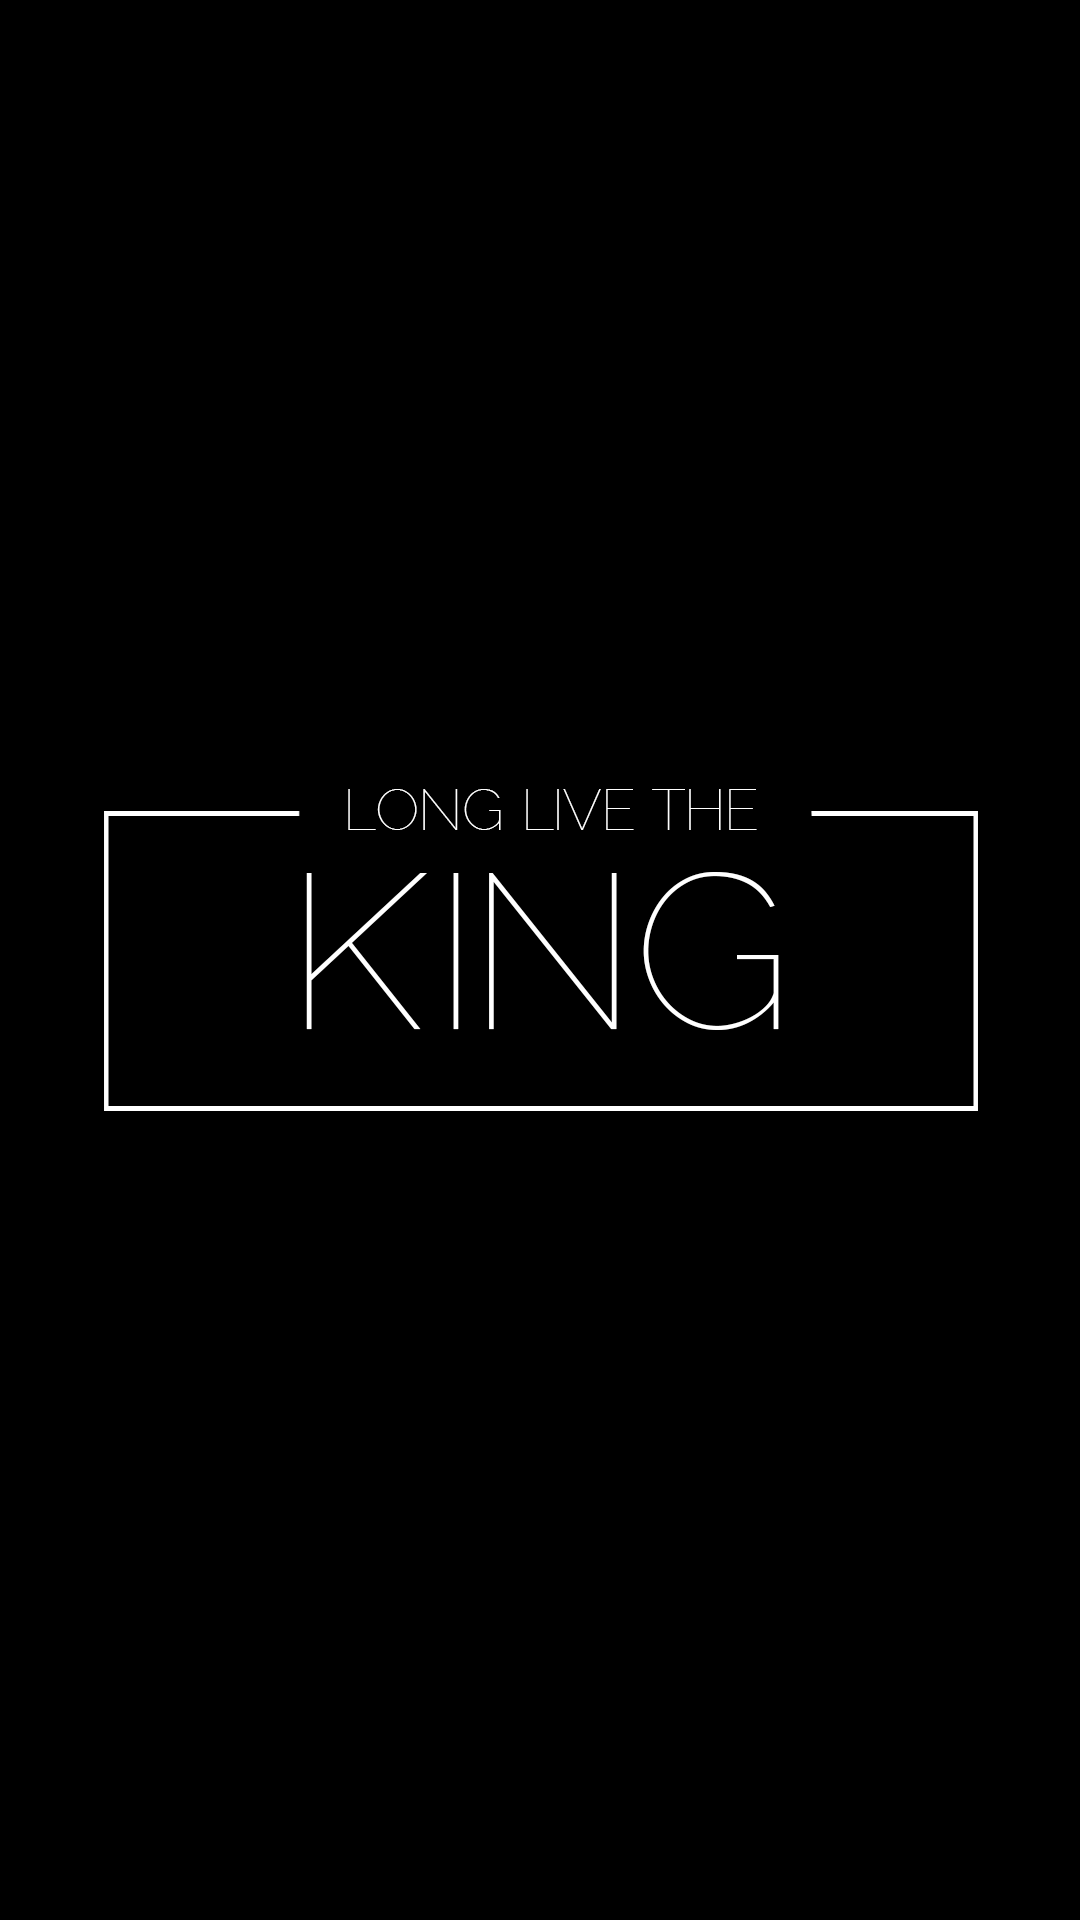 Long Live the King iPhone Wallpaper. Black